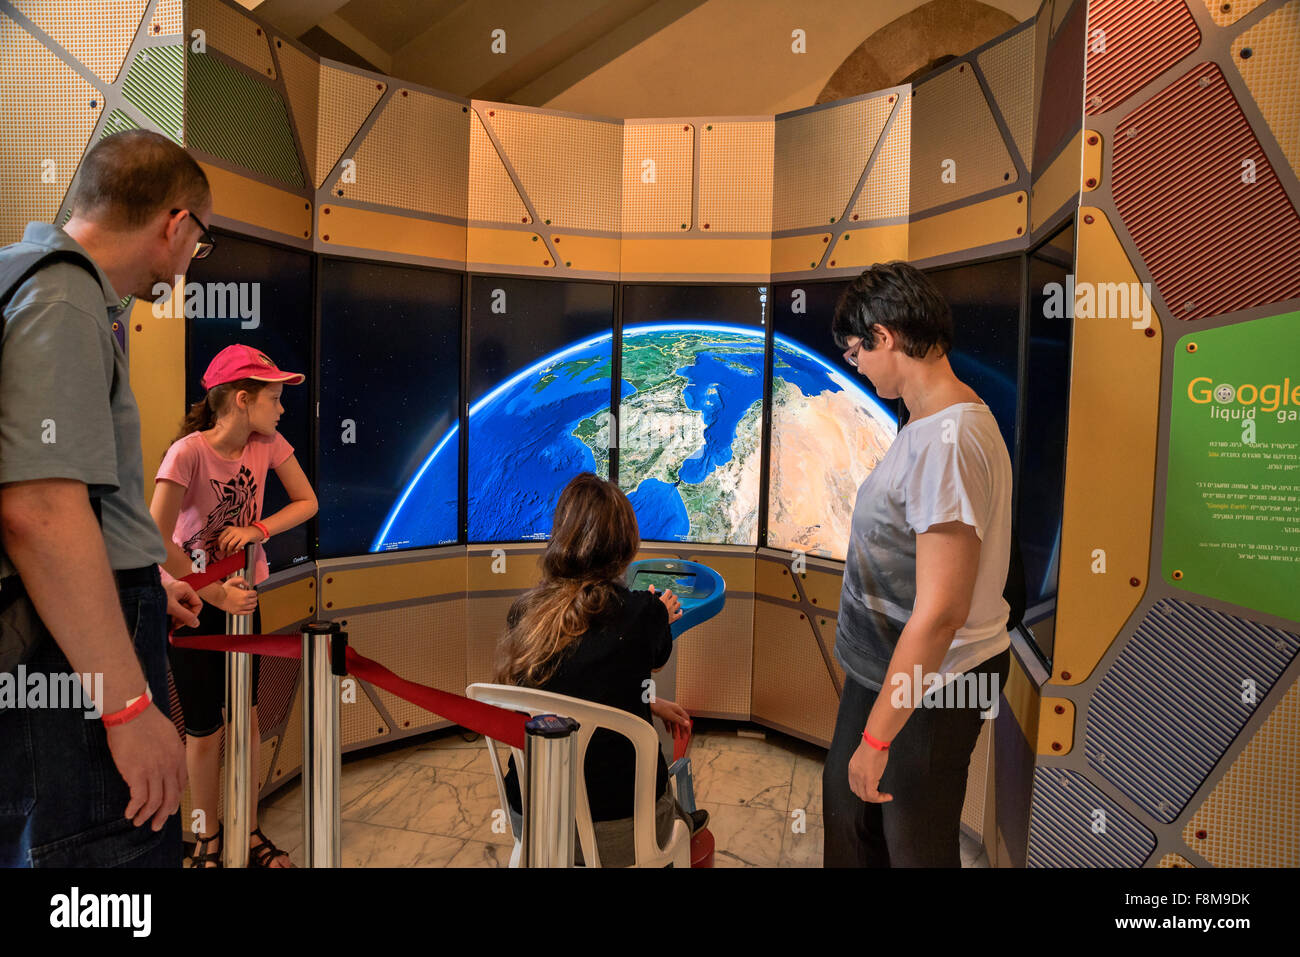 Visitors family watch Google observation panorama, National Museum of Science, Technology, and Space , Israel, Haifa Stock Photo